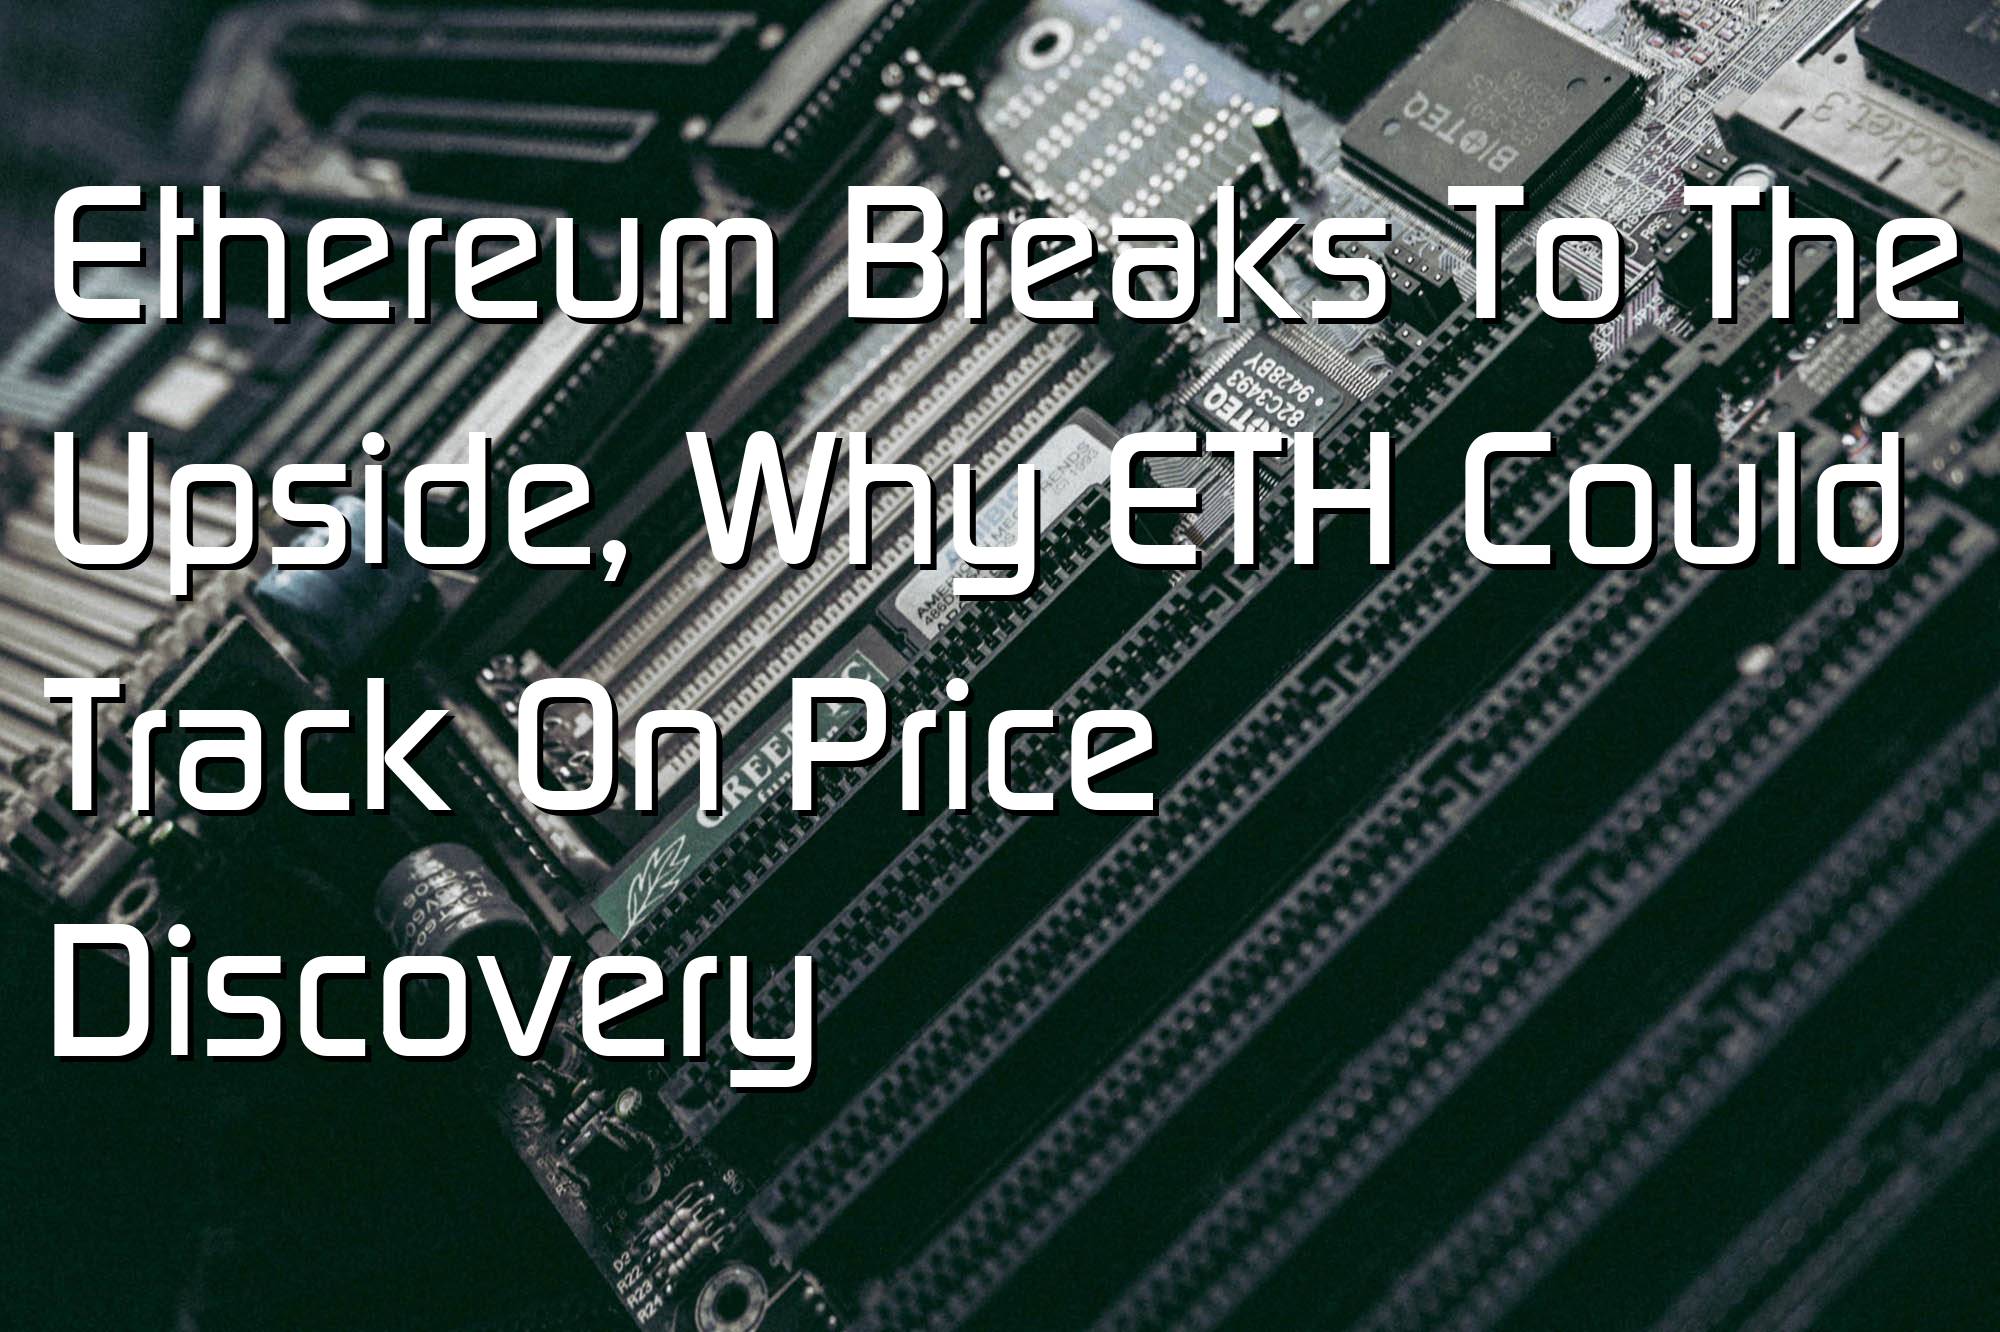 @$62453: Ethereum Breaks To The Upside, Why ETH Could Track On Price Discovery